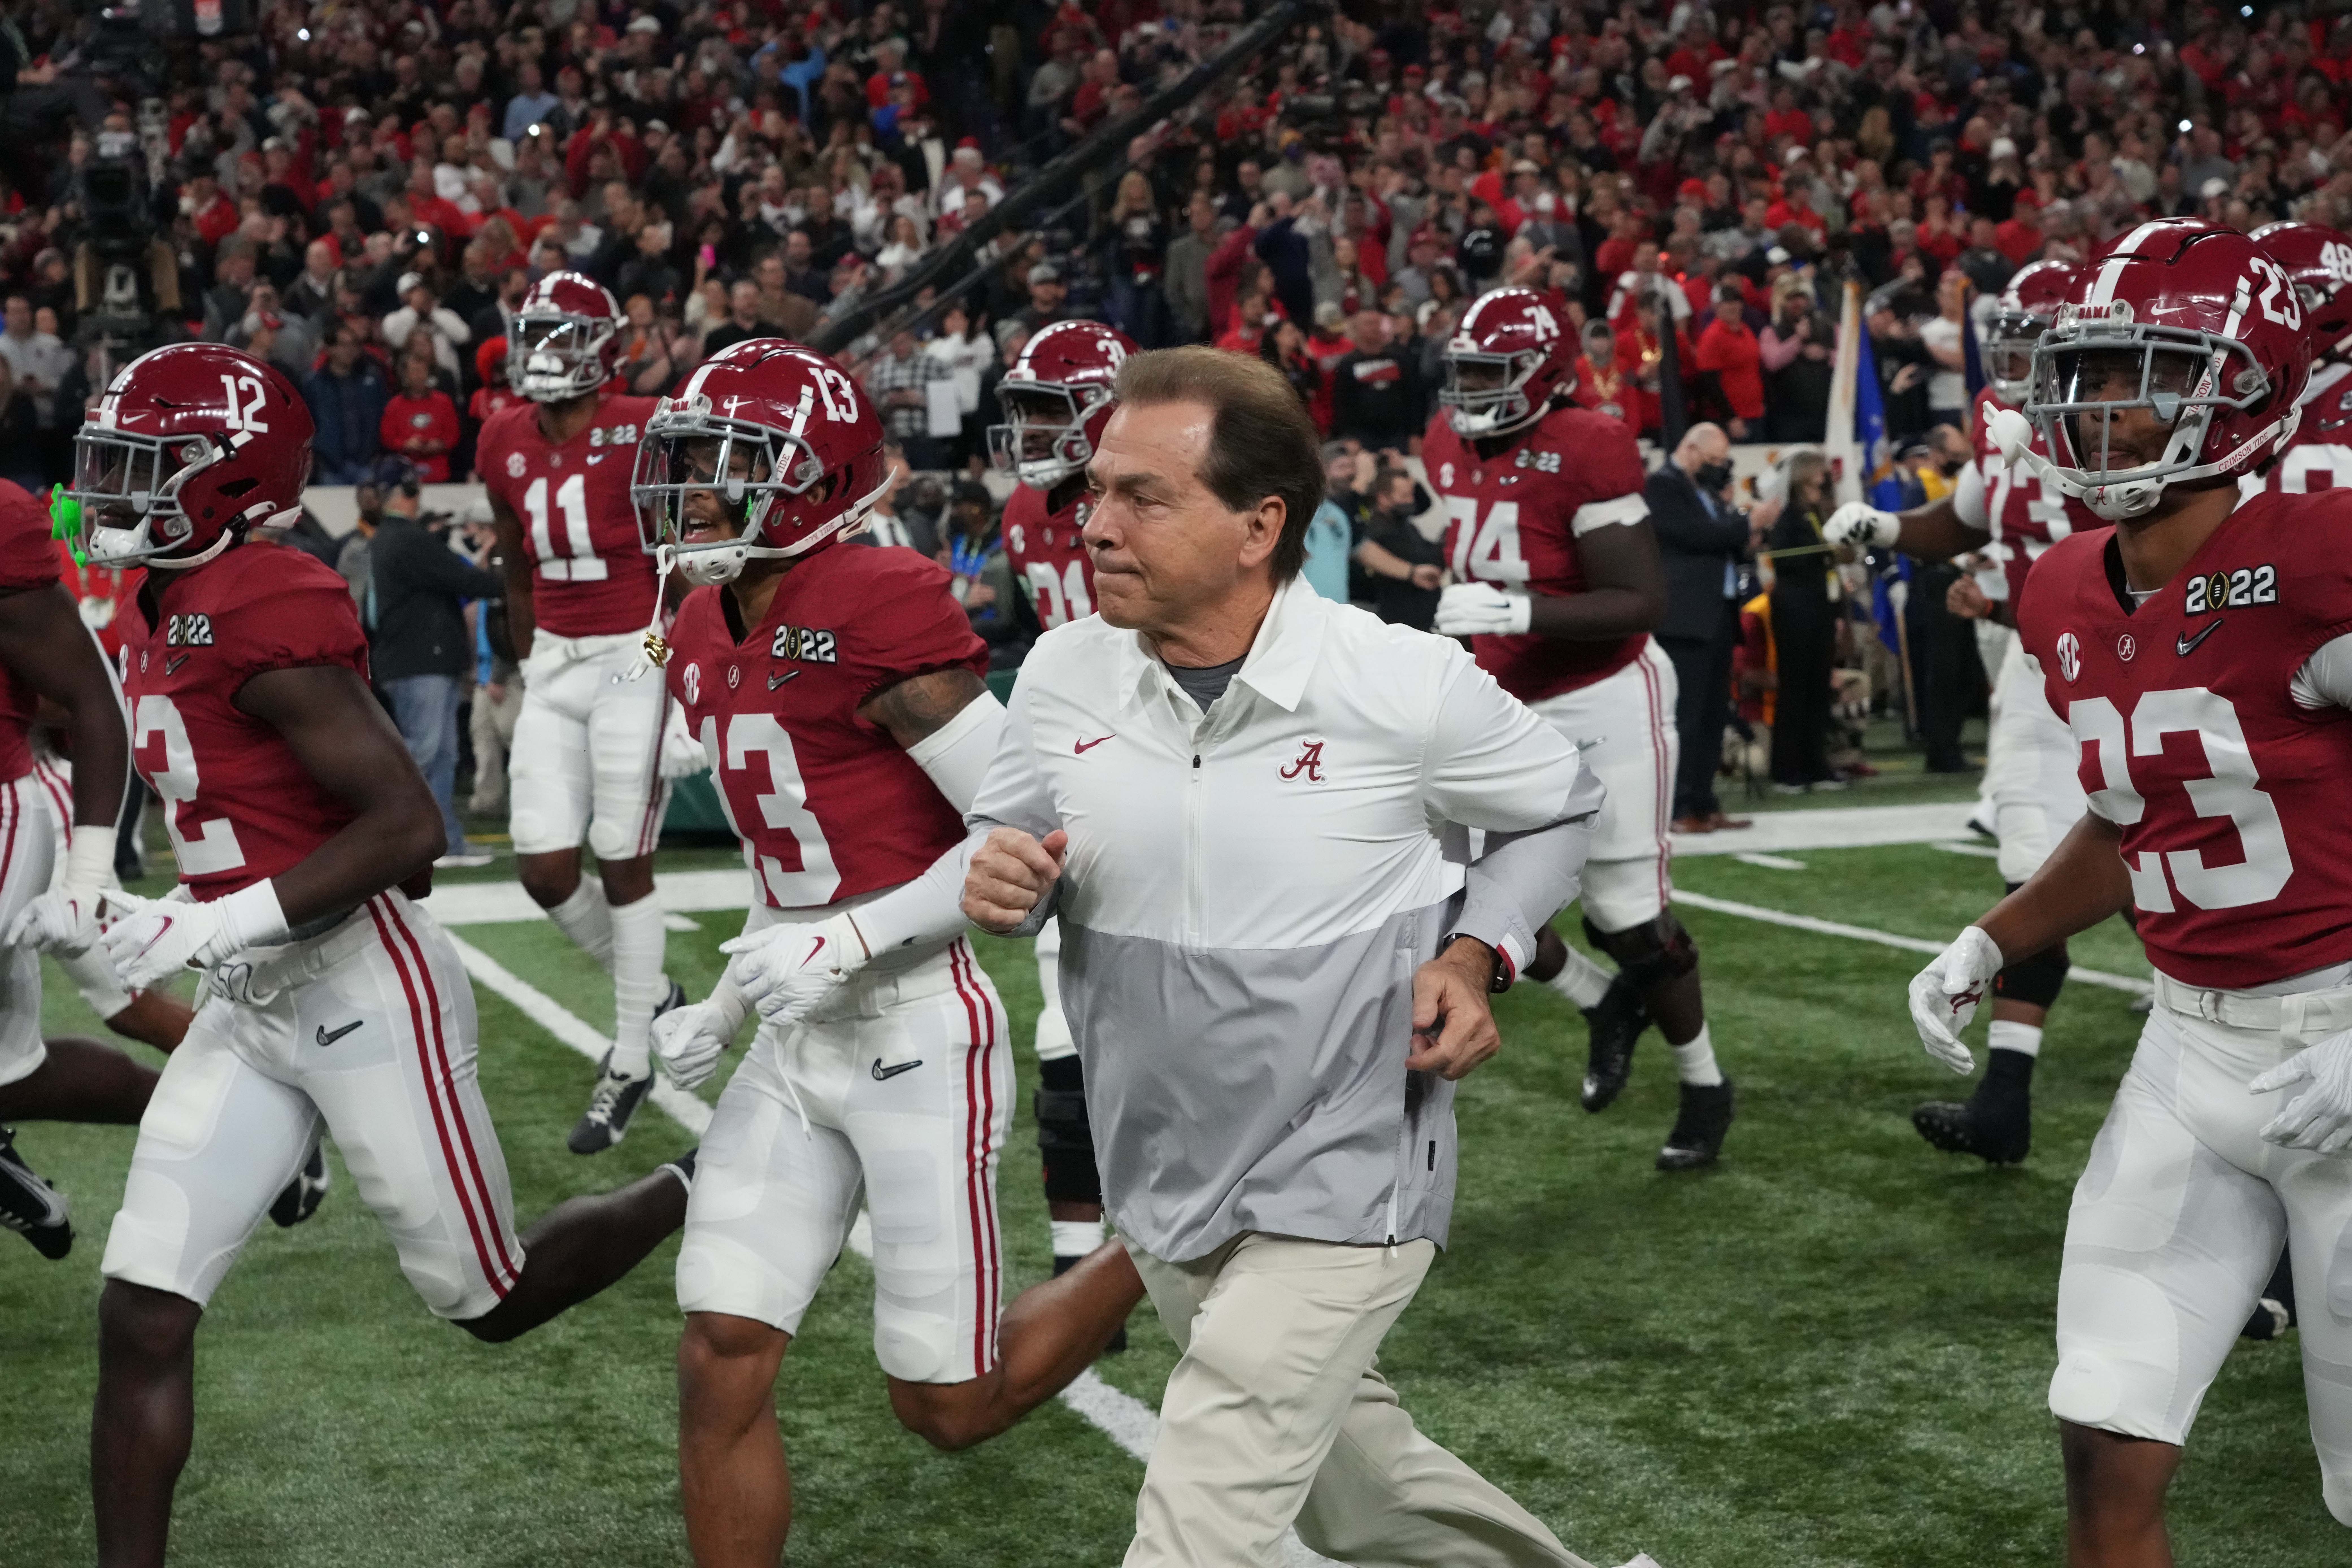 Where Alabama landed in PFF’s way-too-early top 25 rankings